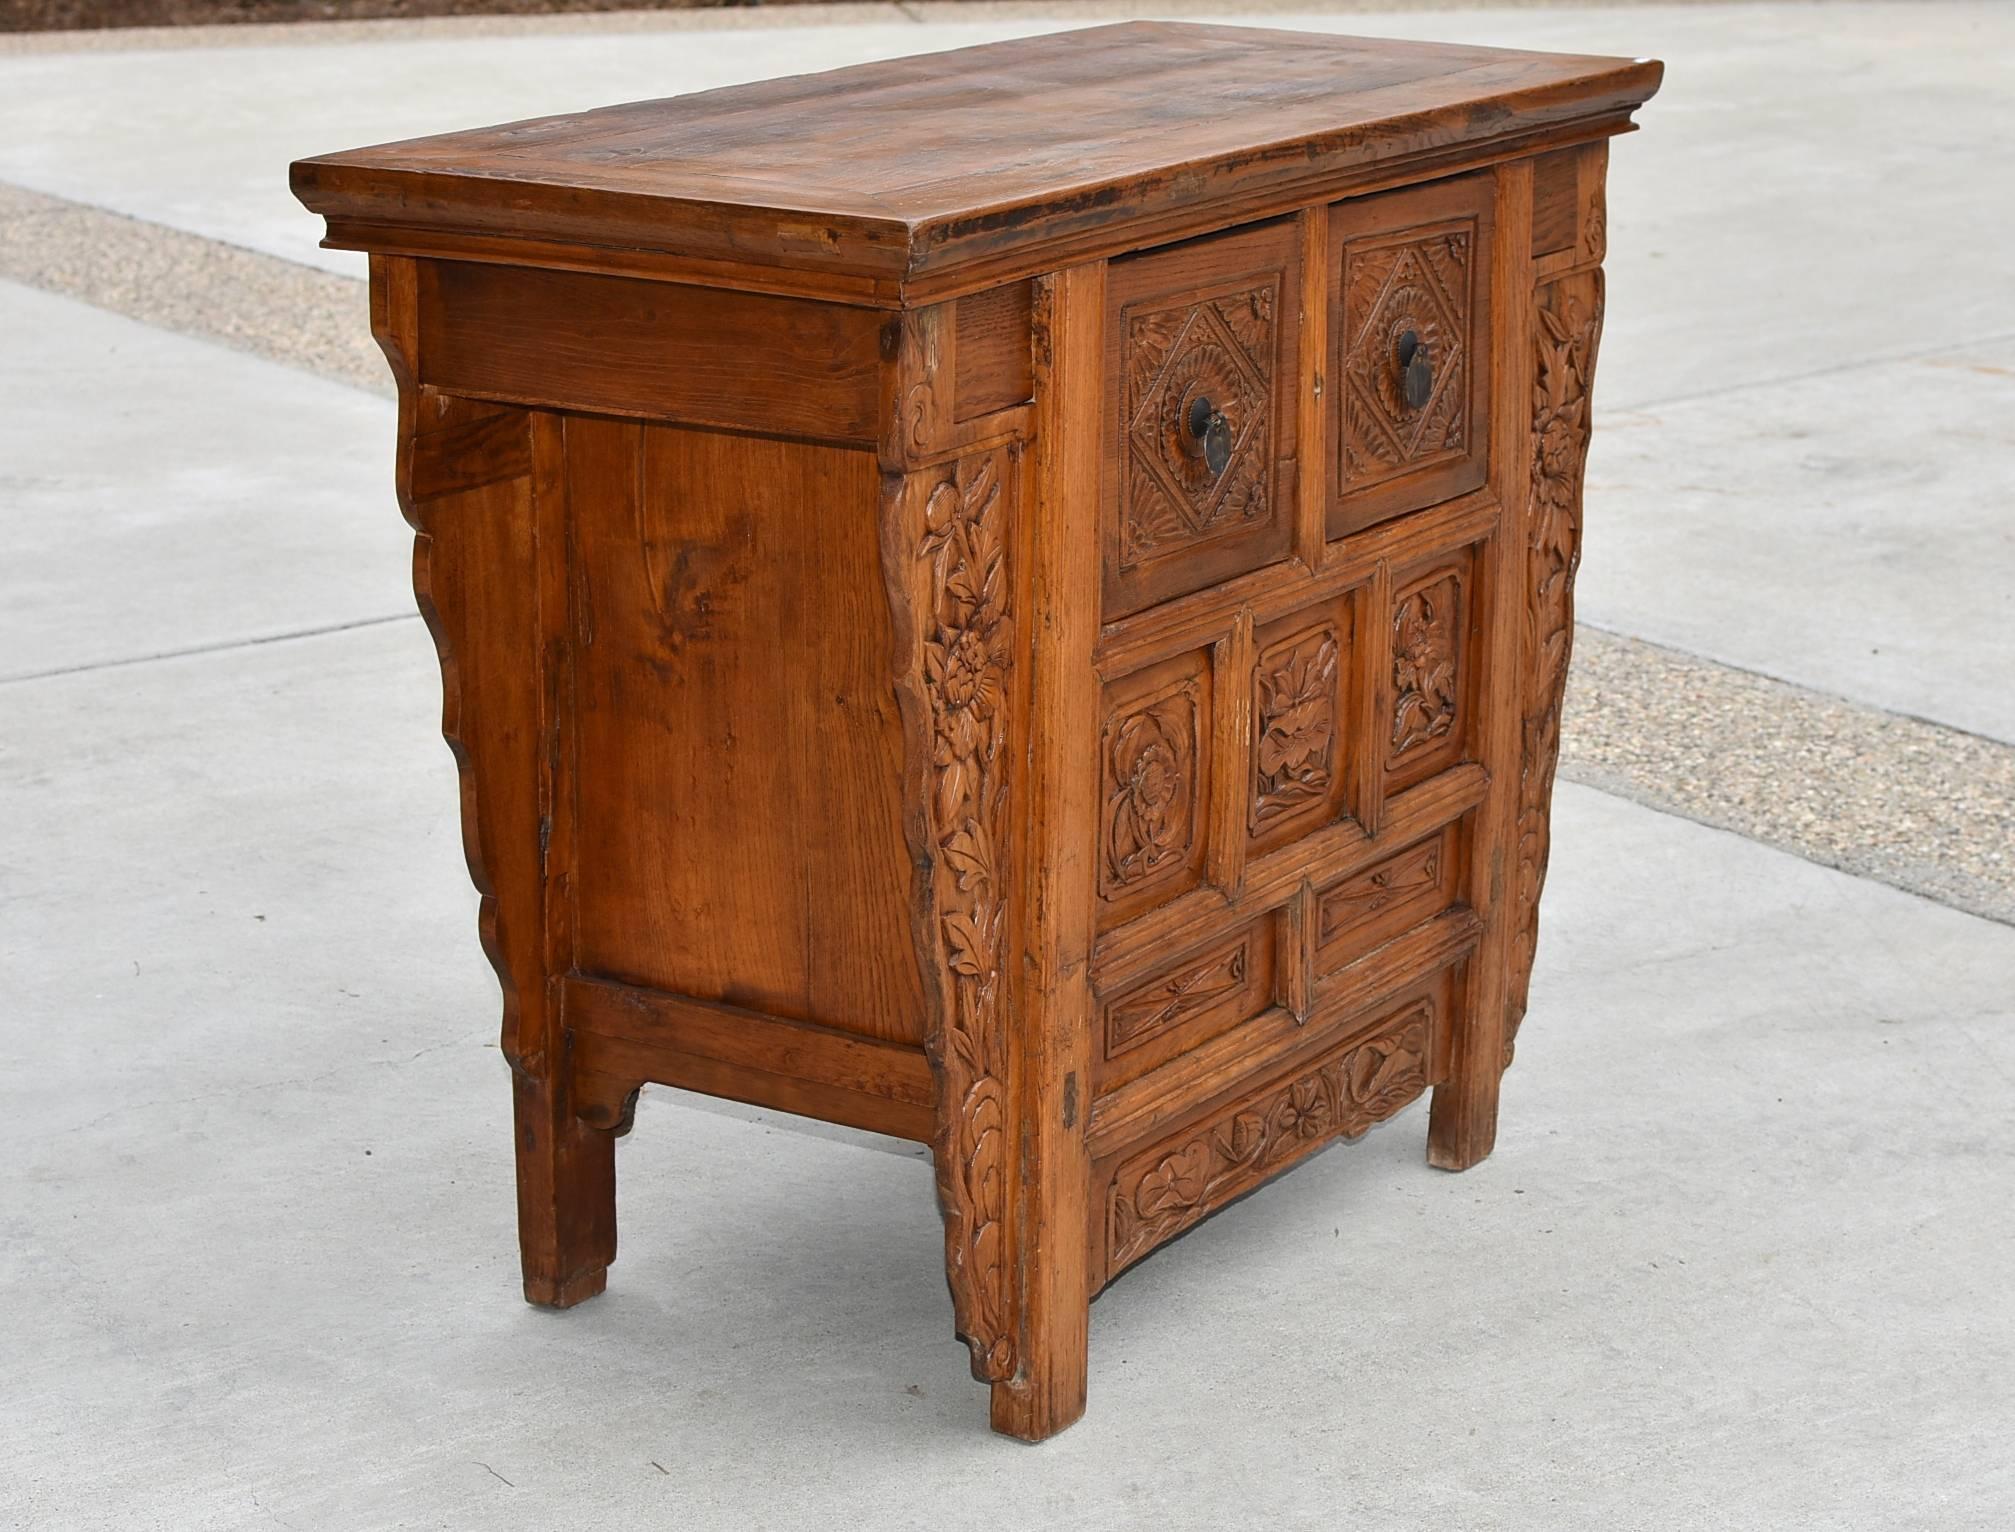 This rustic piece is from Northern China. It has carvings of lotus flowers, sunflowers on the front sides and peonies on the sides. They symbolize peace and good fortune. The carvings are of the typical northern style, which is chunky and rustic.